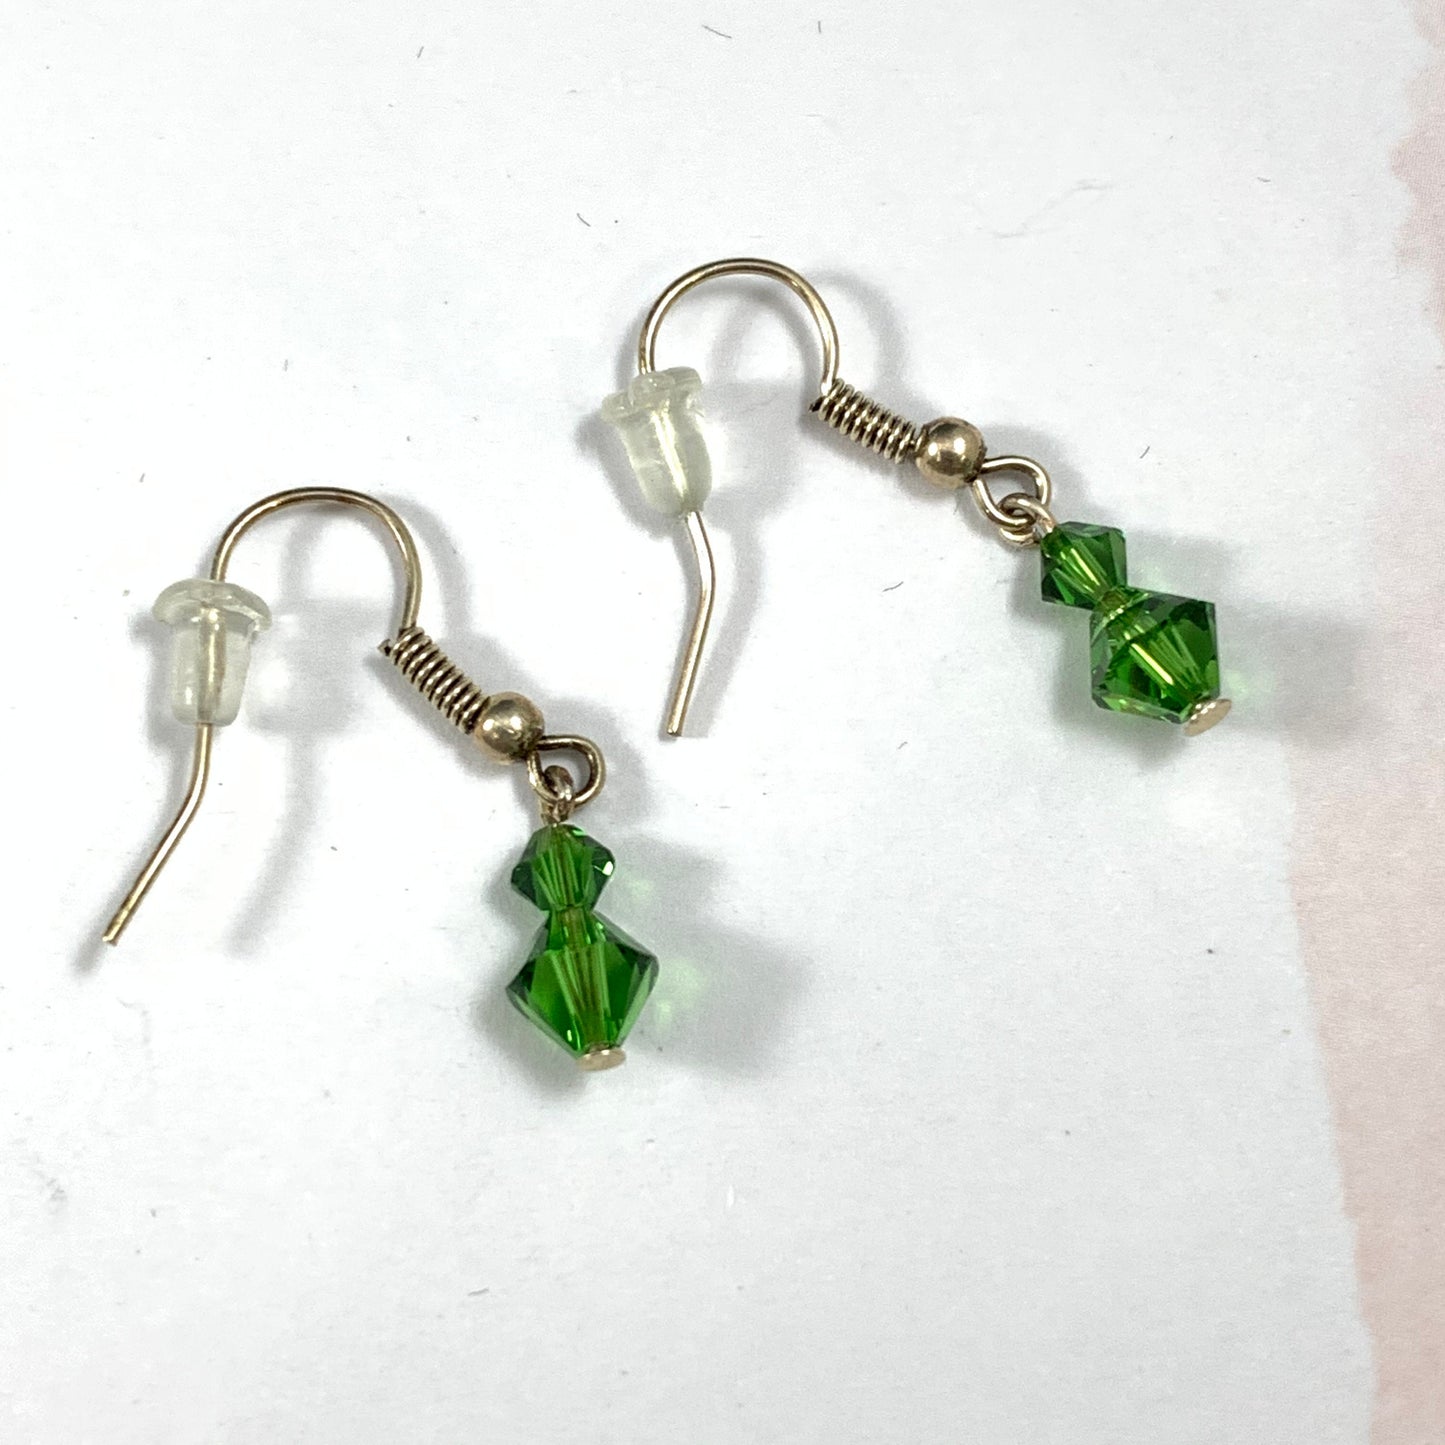 Silver earrings with 2 green crystal beads incorporated into the styling.